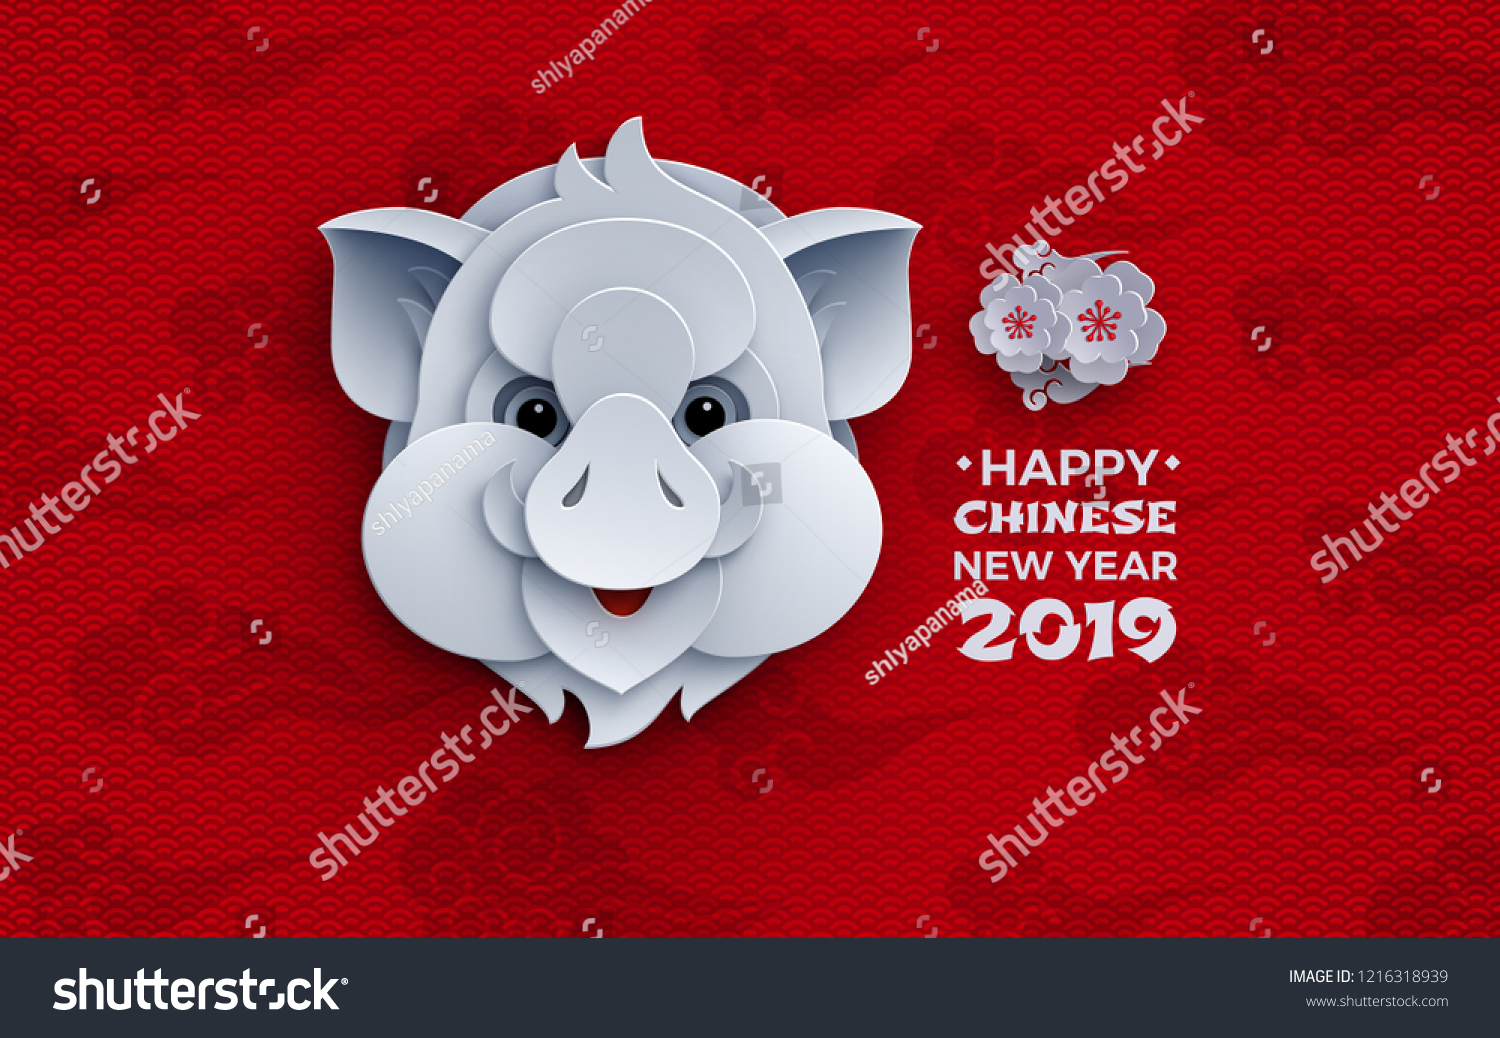 Chinese new year banner design, year of the pig, zodiac sign, animal symbol of 2019, traditional sakura cherry flowers, pattern oriental red background. Paper cut out art style, vector illustration #1216318939